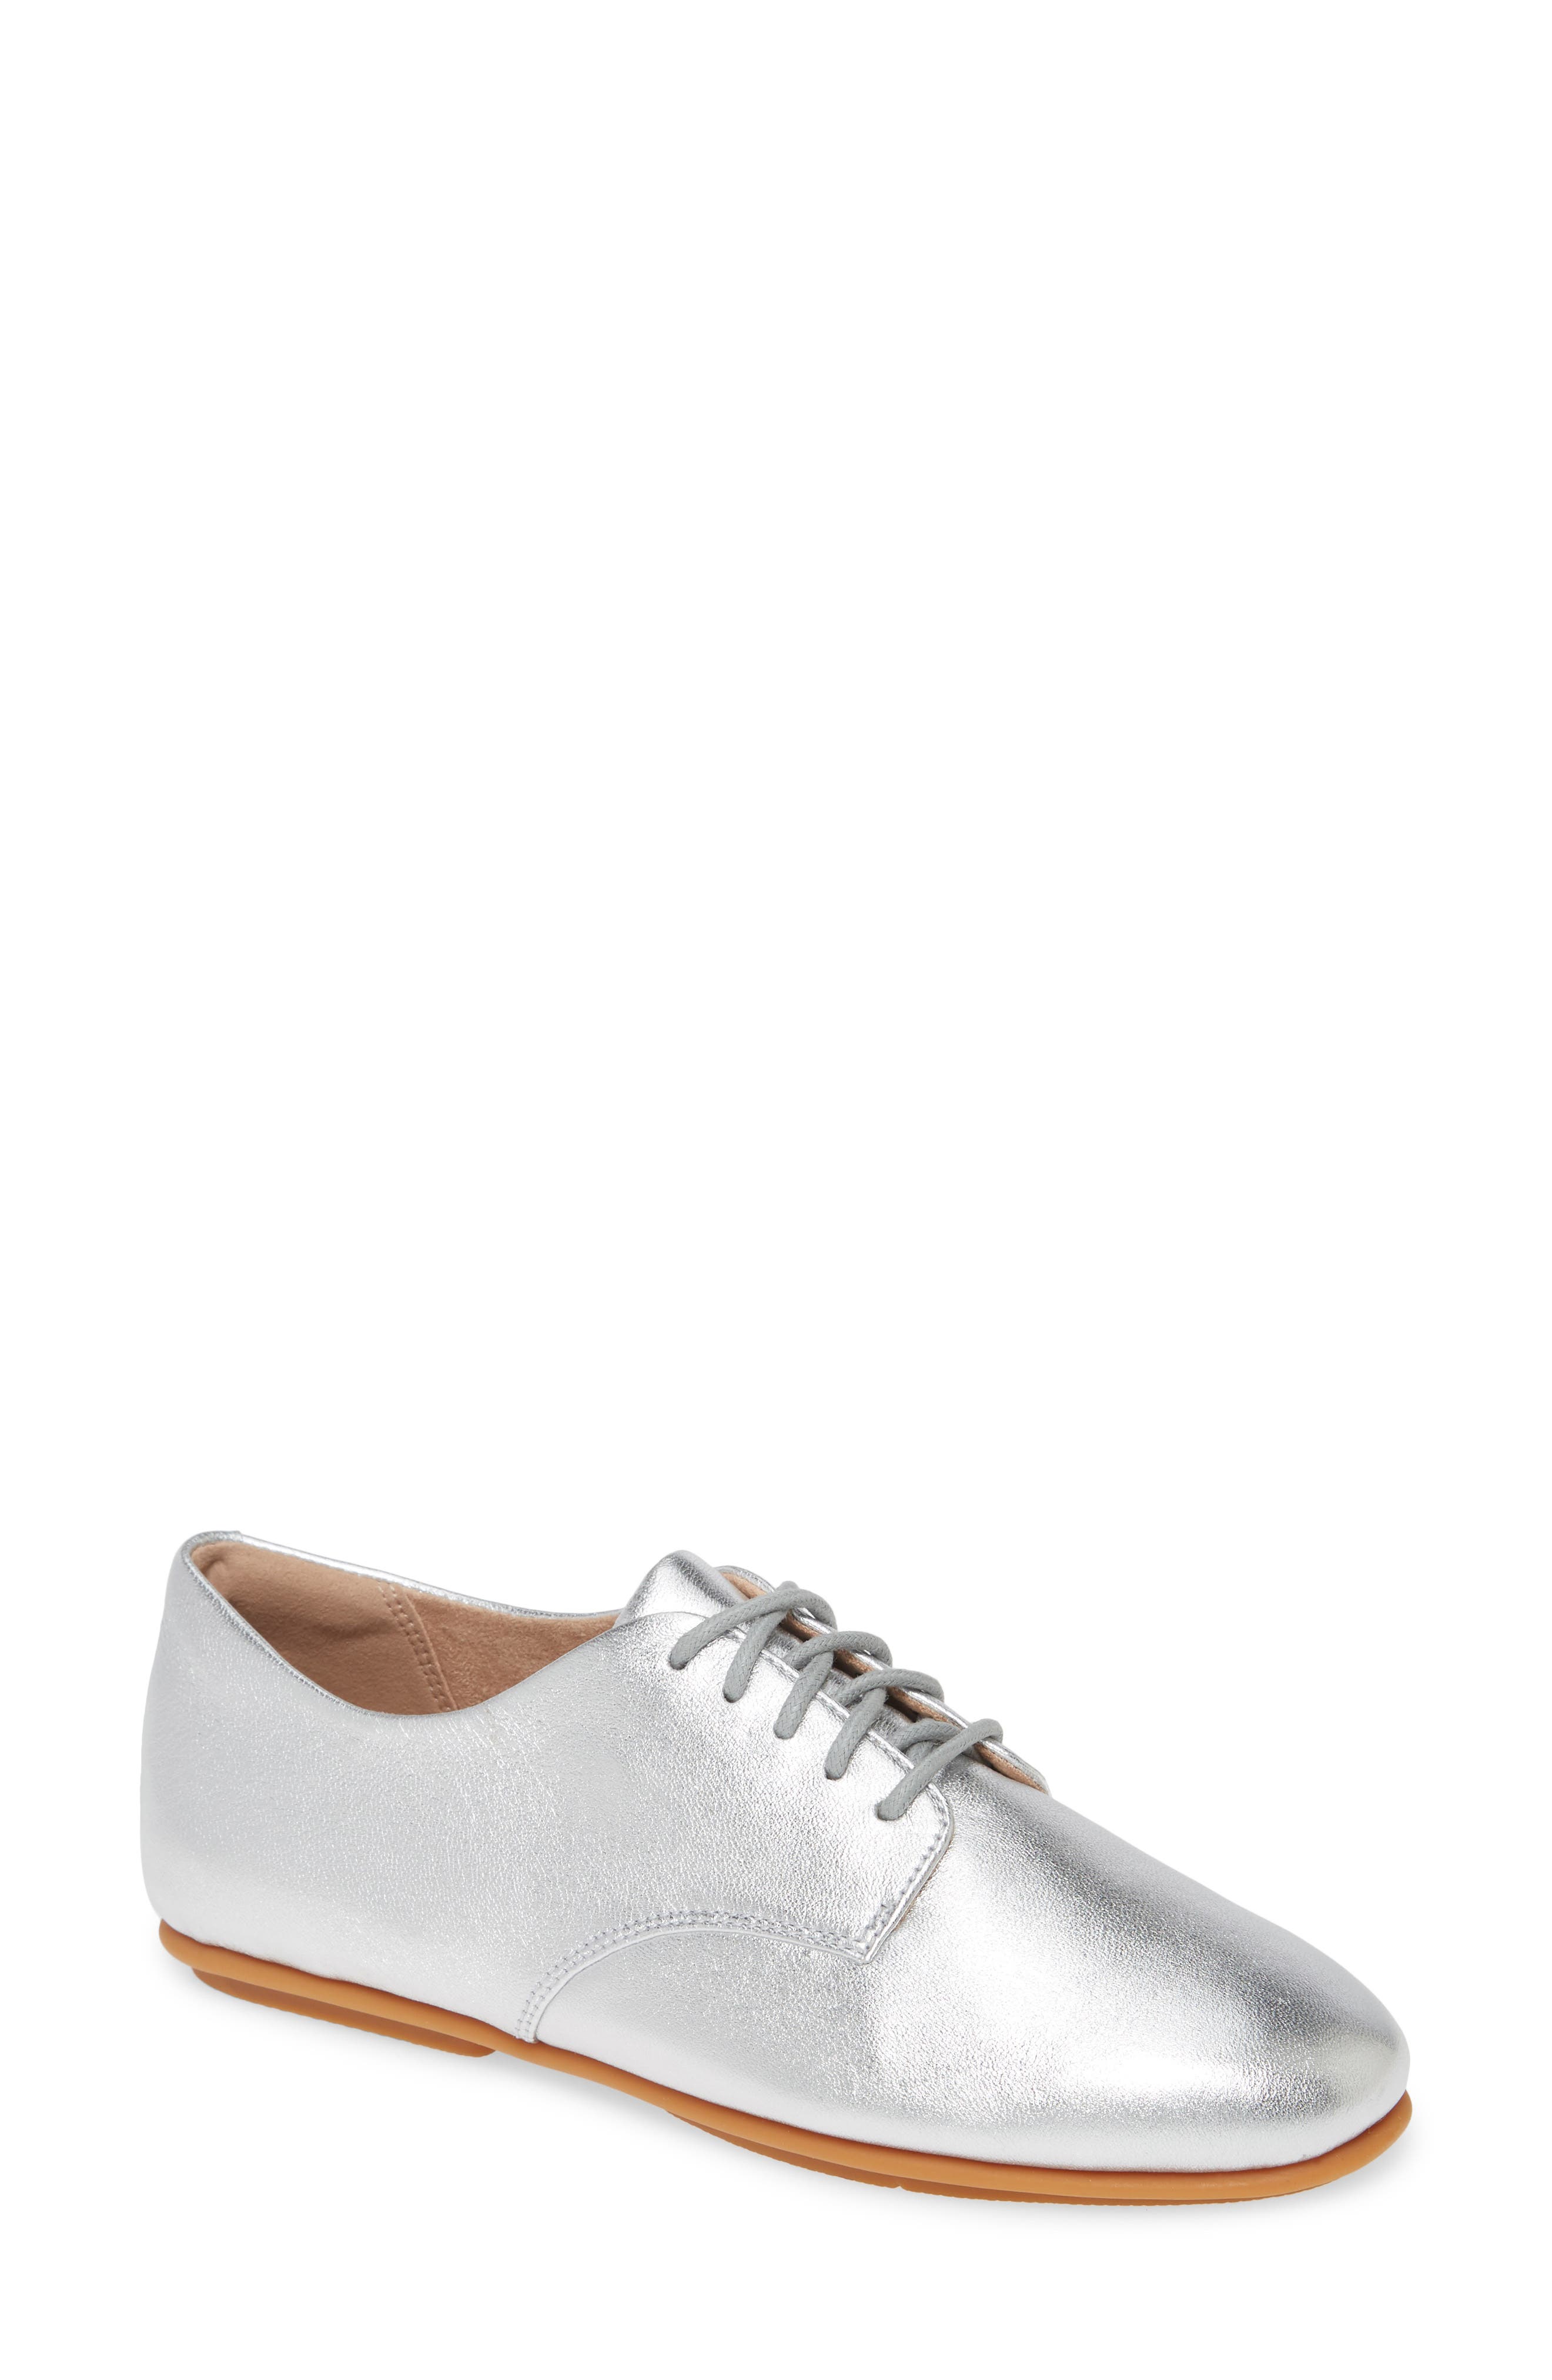 Women's Oxfords Clearance | Nordstrom Rack